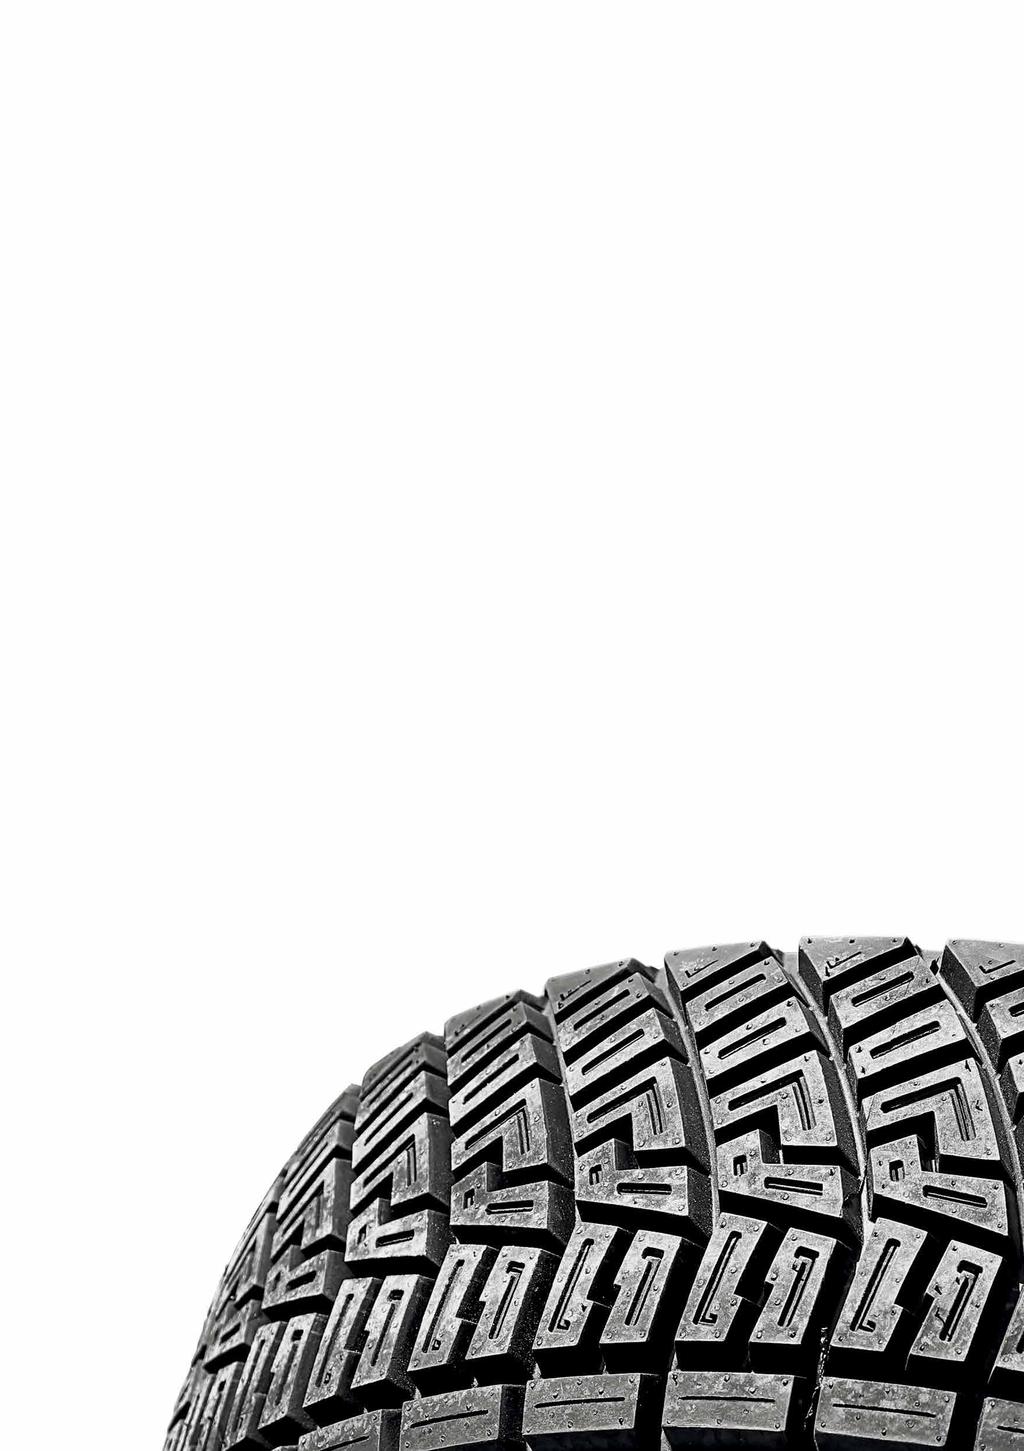 Technical Terms DMACK uses the following terms to describe its tyres: Safety Notes 215/65 R15 DMG+2 S6 215 Width of tyre section in mm 65 Aspect ratio R Radial construction 15 Wheel rim diameter in